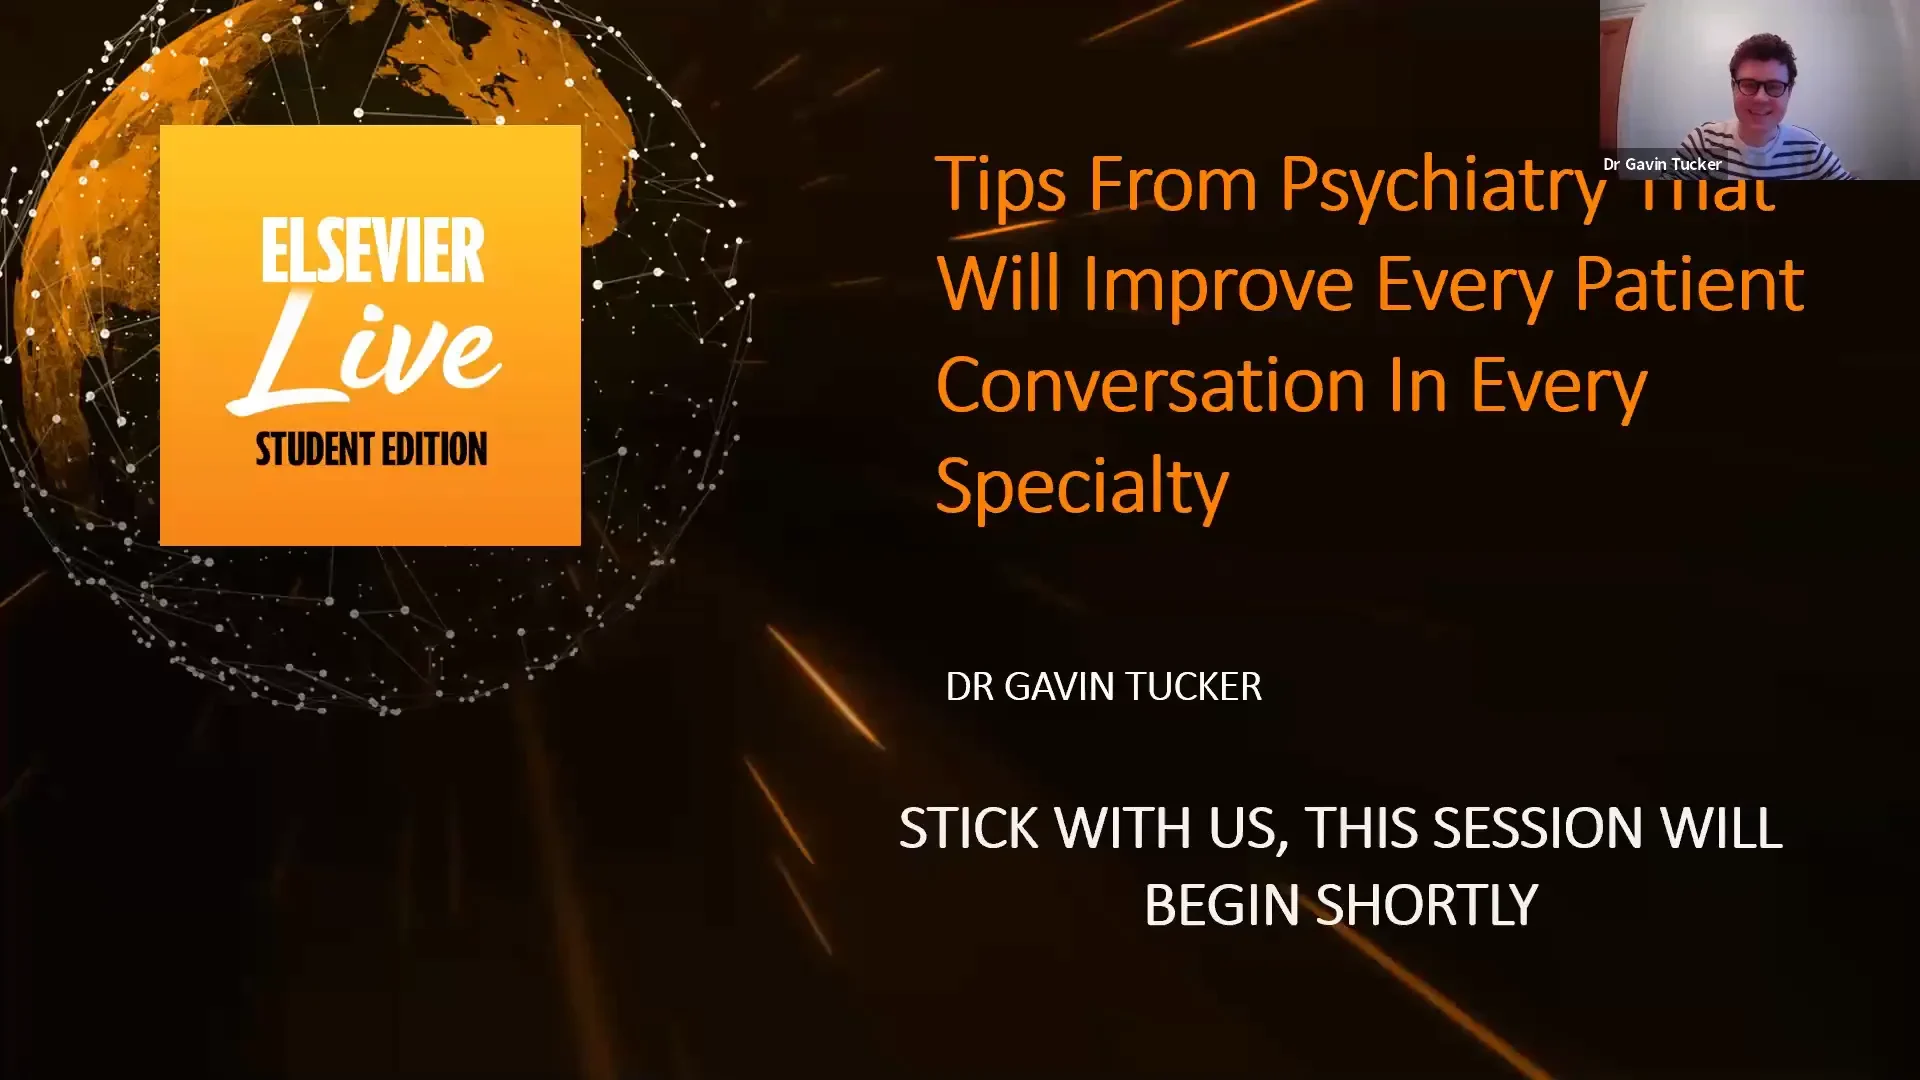 Tips from Psychiatry That Will Improve Every Patient Conversation in Every Specialty